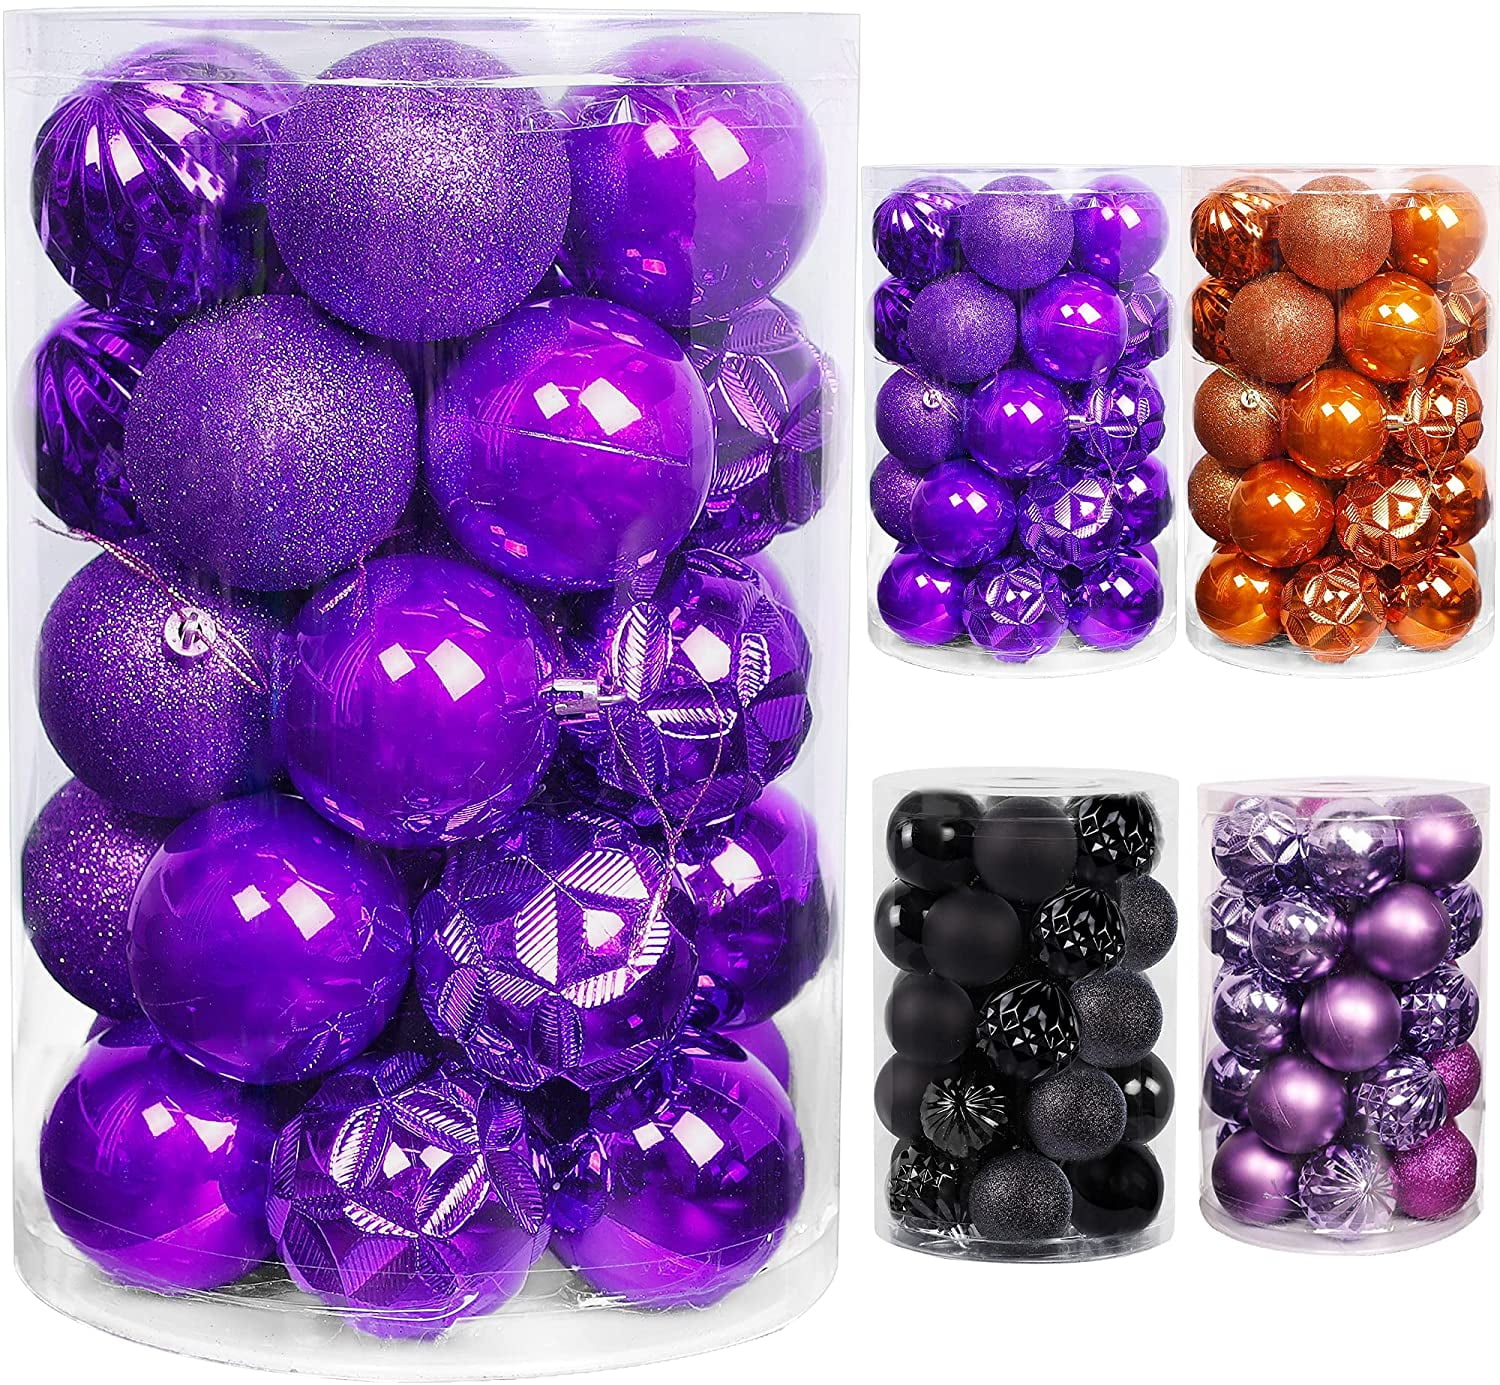 34 Count Pre-Strung Plastic Balls Dark Purple Shatterproof Barrel Packed Balls for Holiday Halloween Party Wreath Tabletop Tree Decorations 2.36 Inch Lulu Home Halloween Hanging Ornaments 